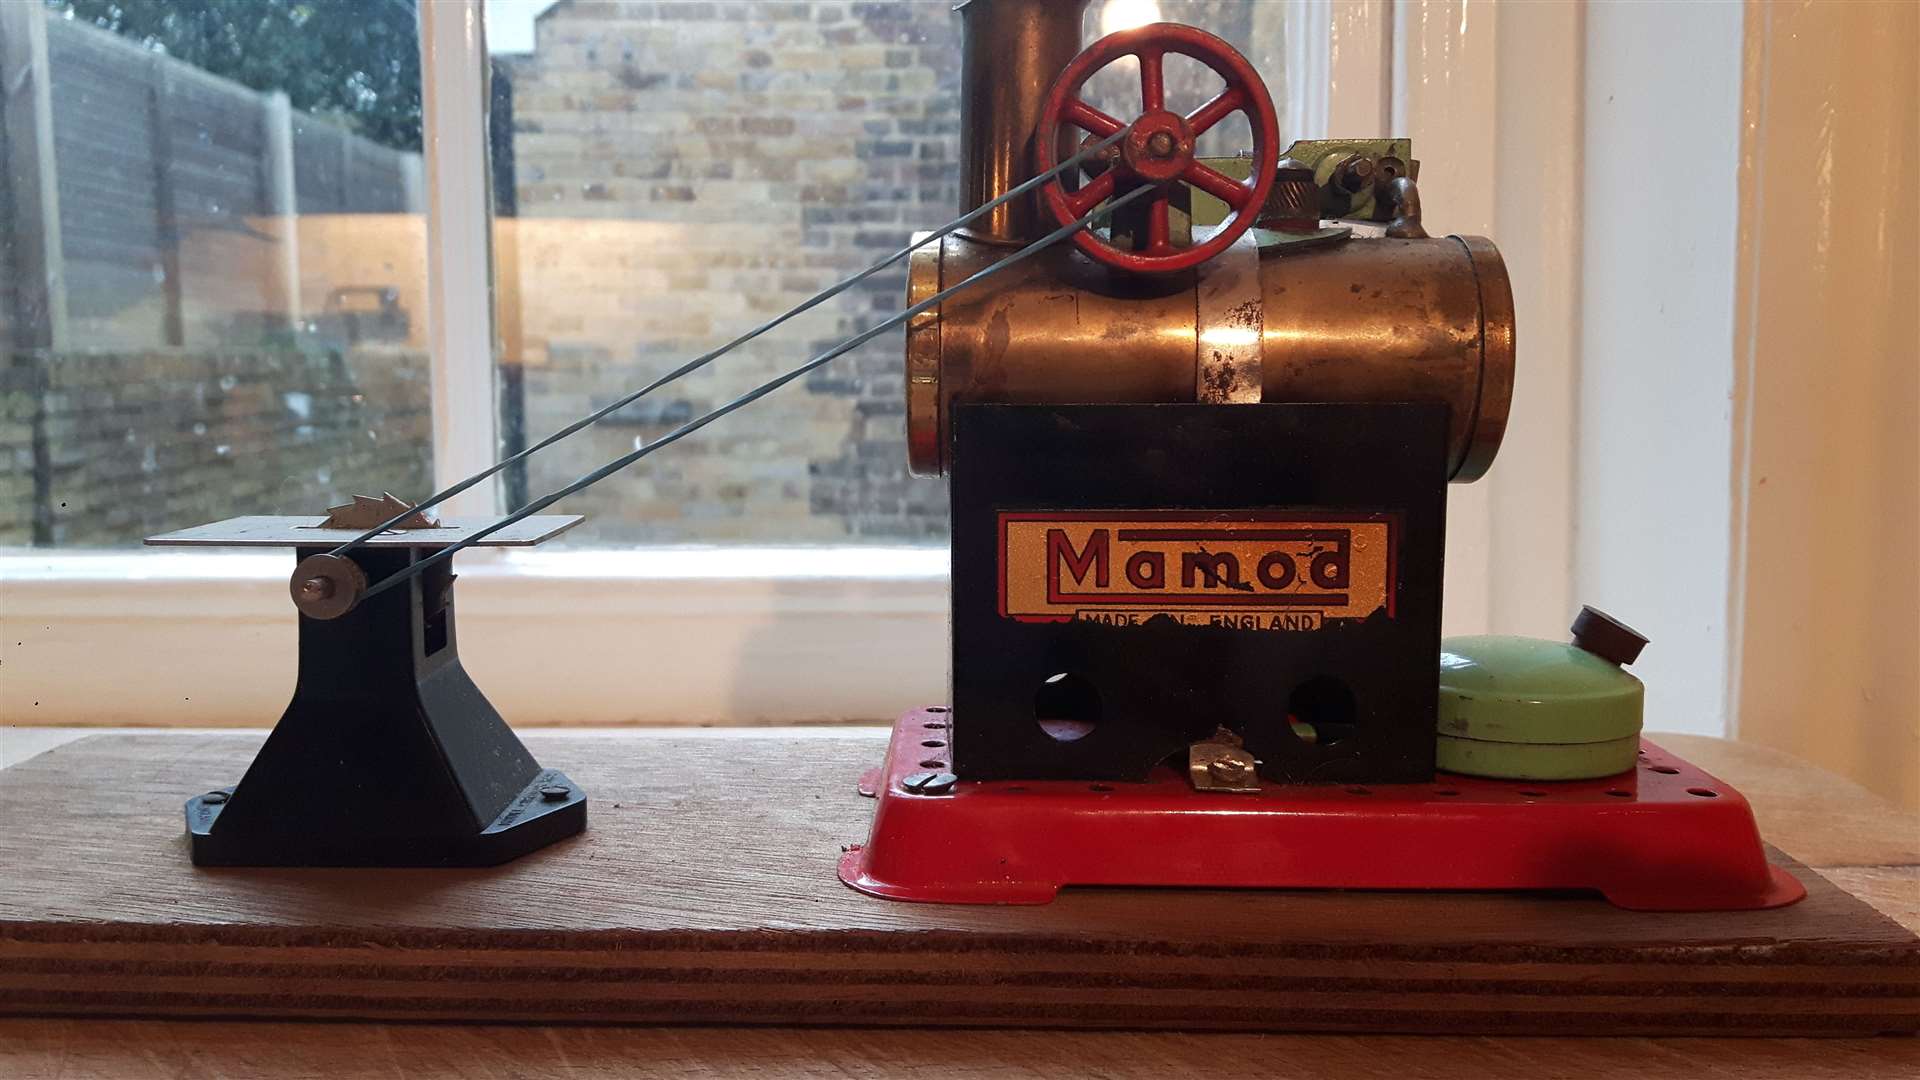 A Mamod steam engine and saw from the early 1960s